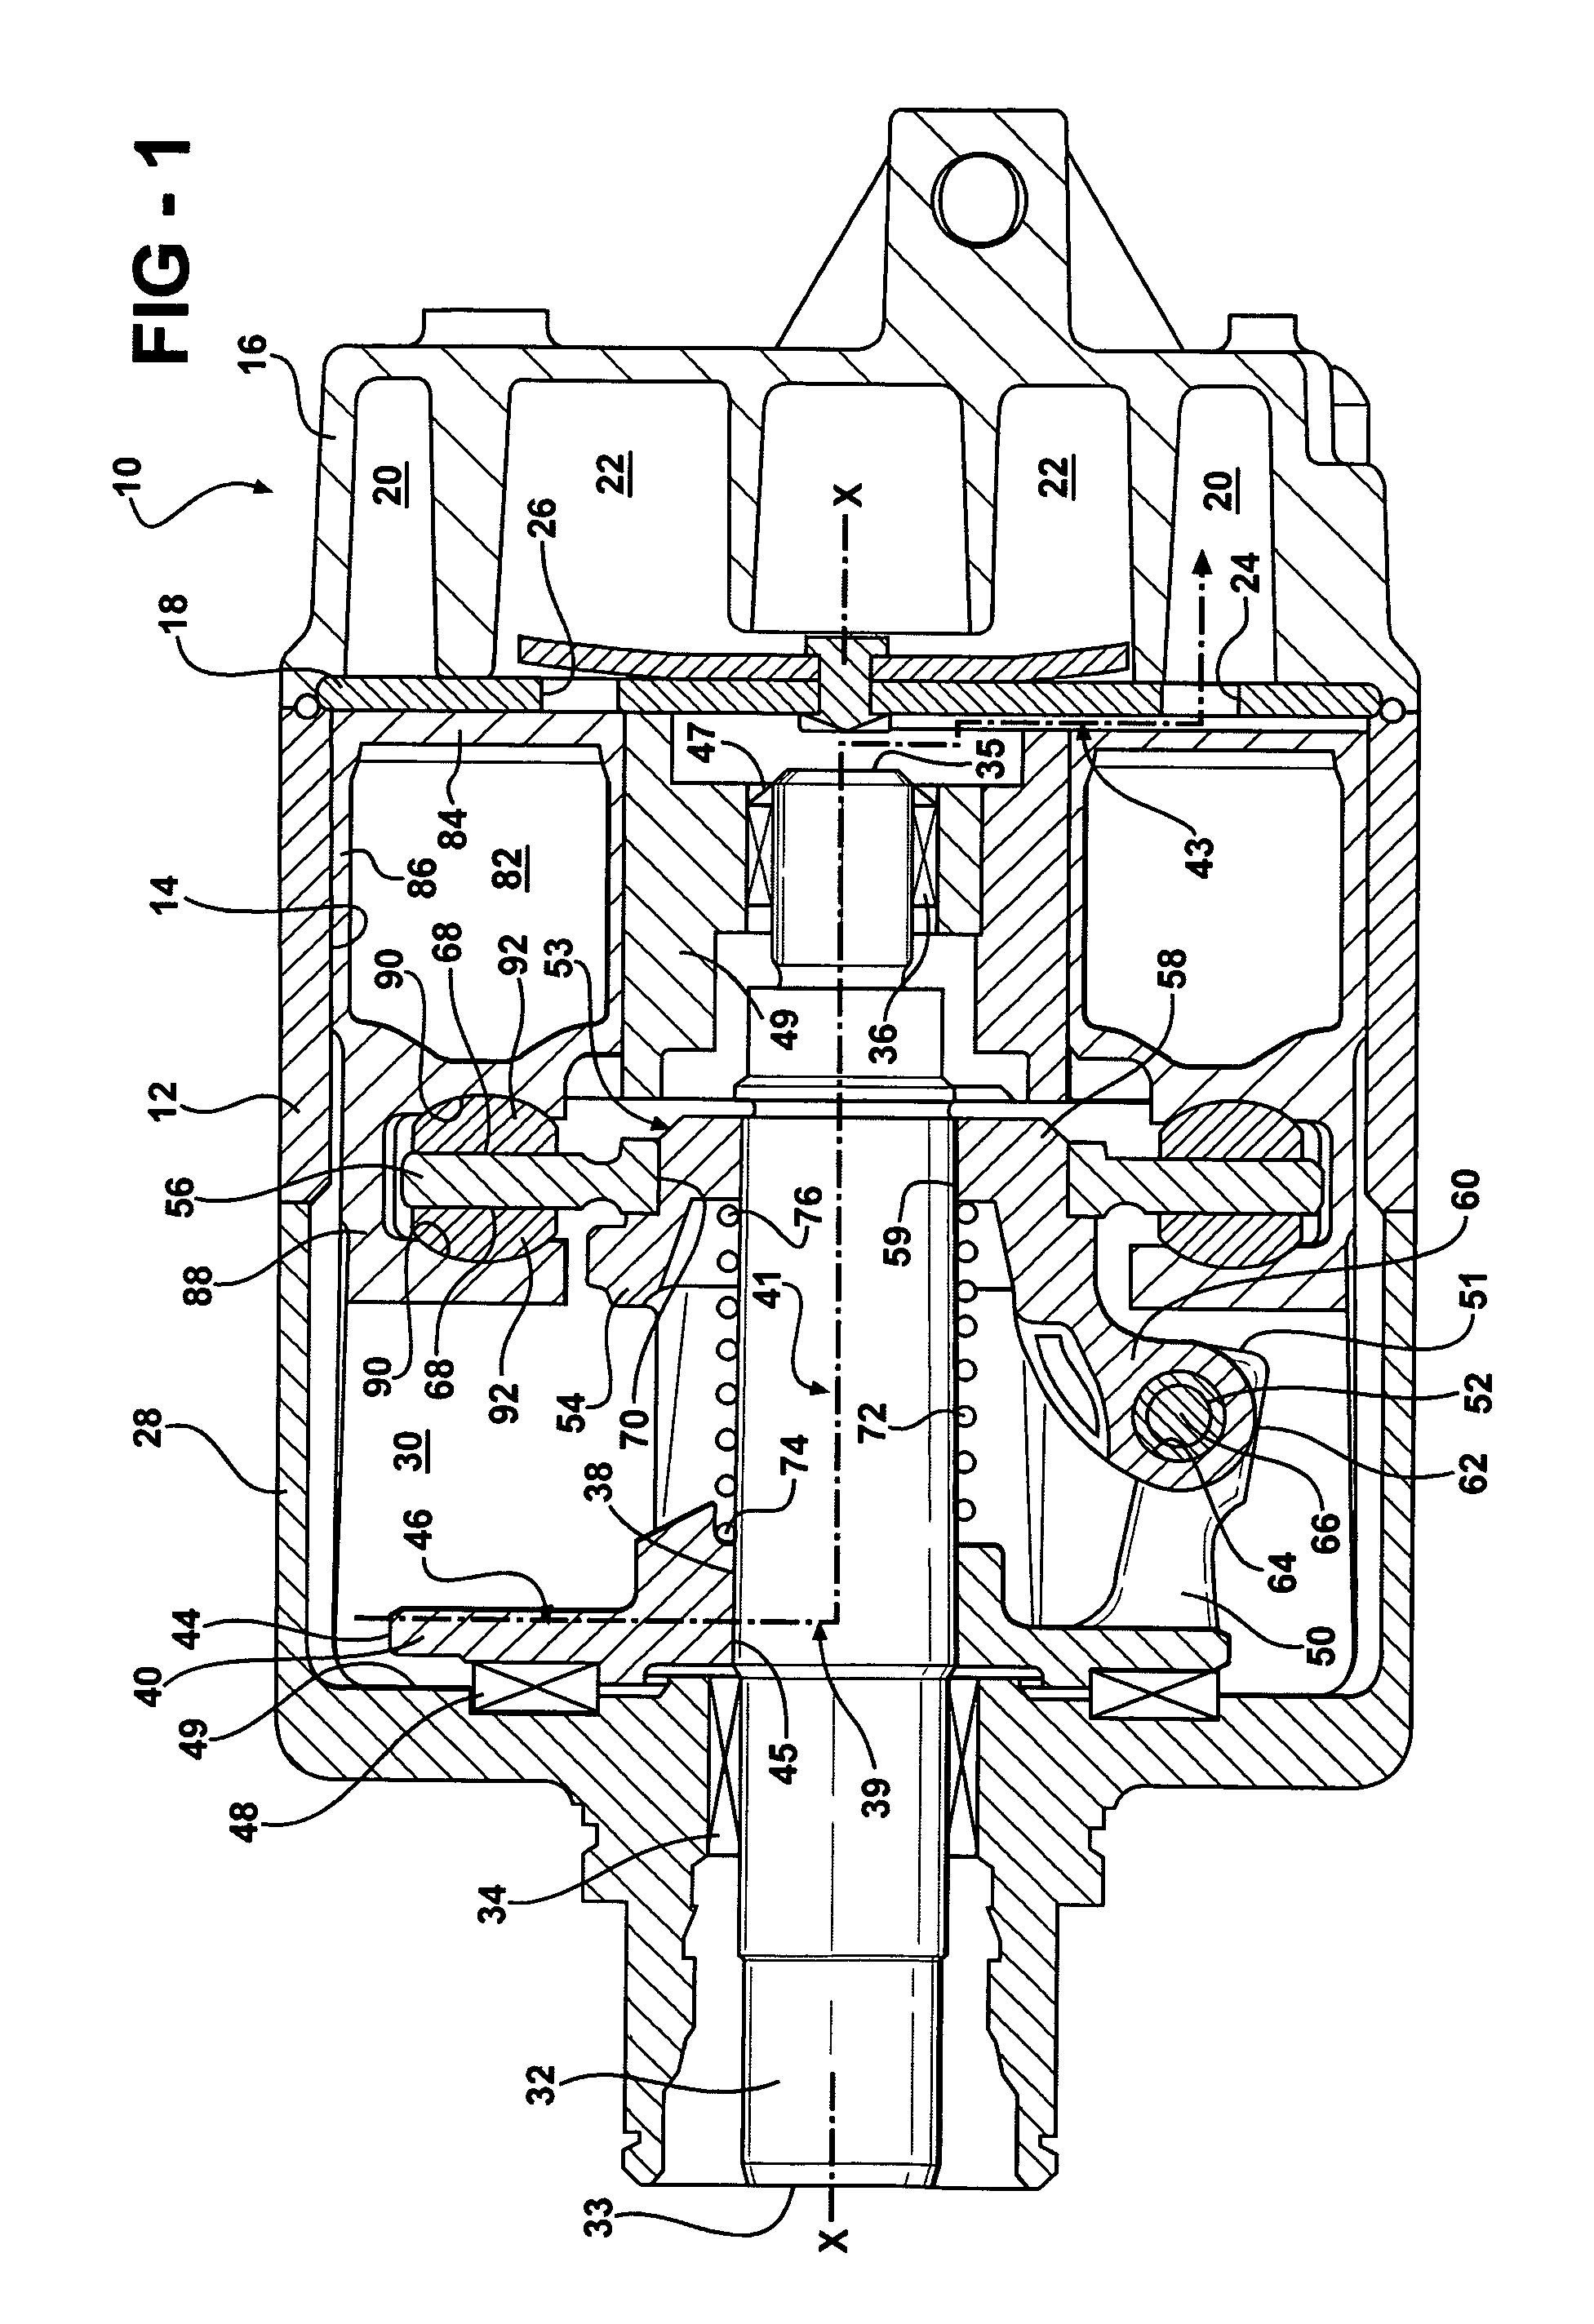 Oil separator for a fluid displacement apparatus